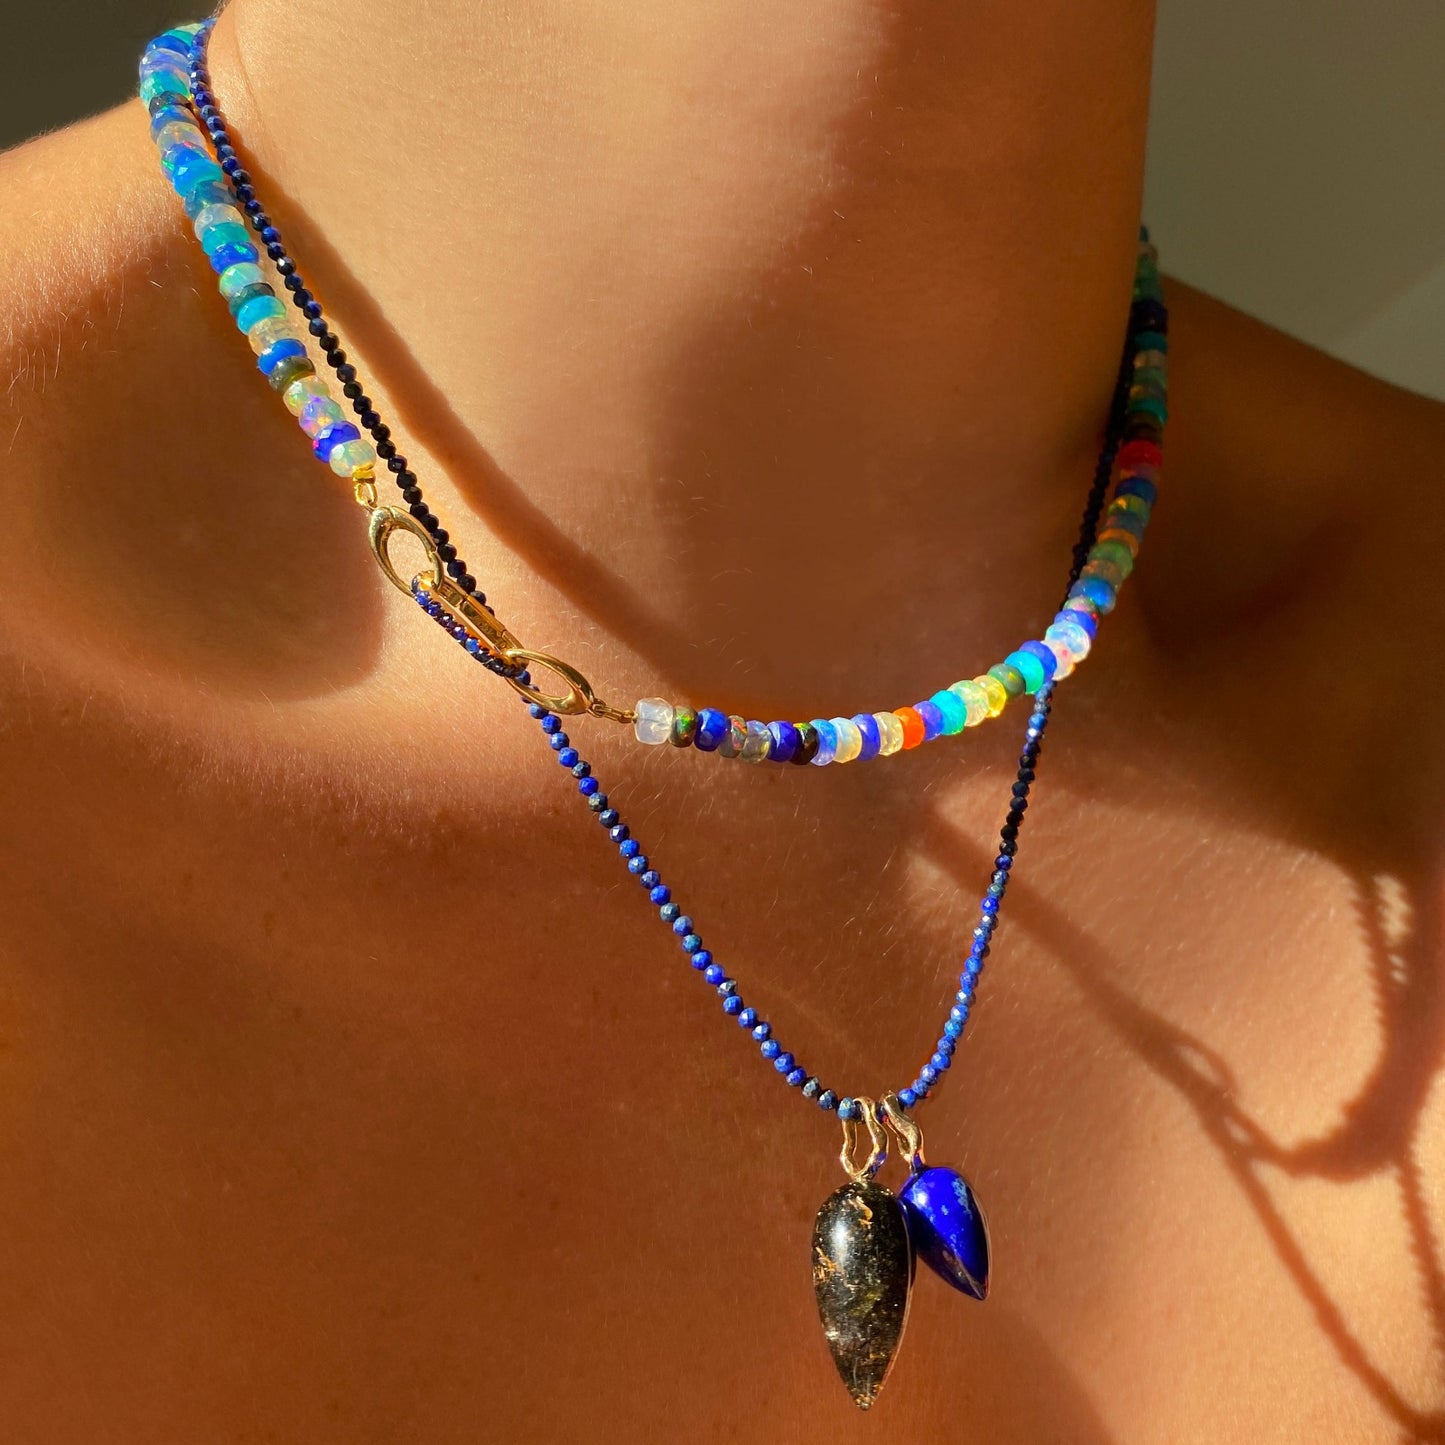 Shimmering beaded necklace made of 2mm faceted opals in shades of blue on a gold linking lobster clasp. Styled on a neck layered with two acorn charm locks.